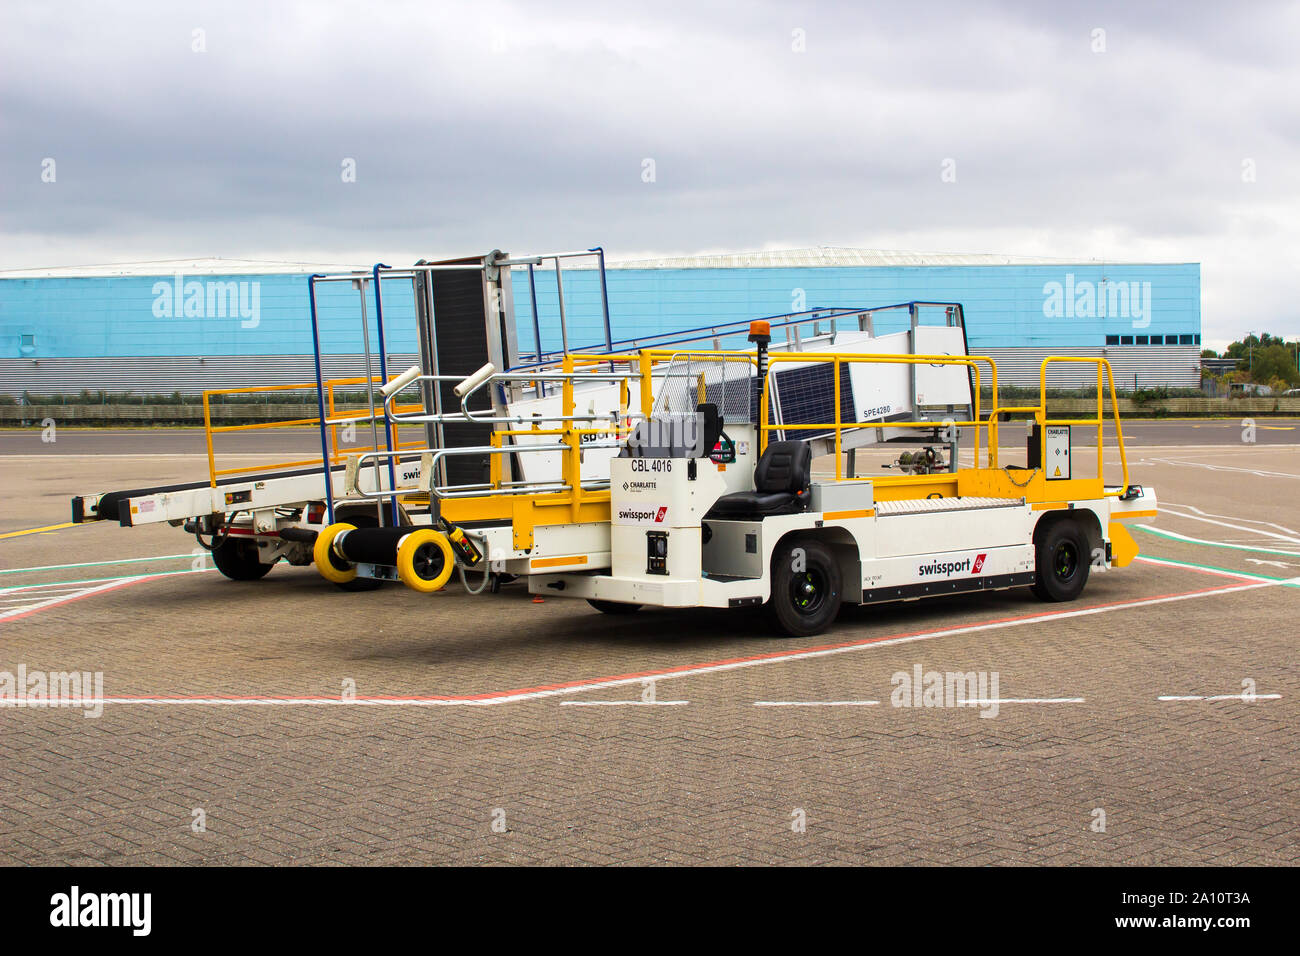 16 September 2019 Various baggage handling vehicles and loaders parked up in the early evening at Southampton Airport England Stock Photo